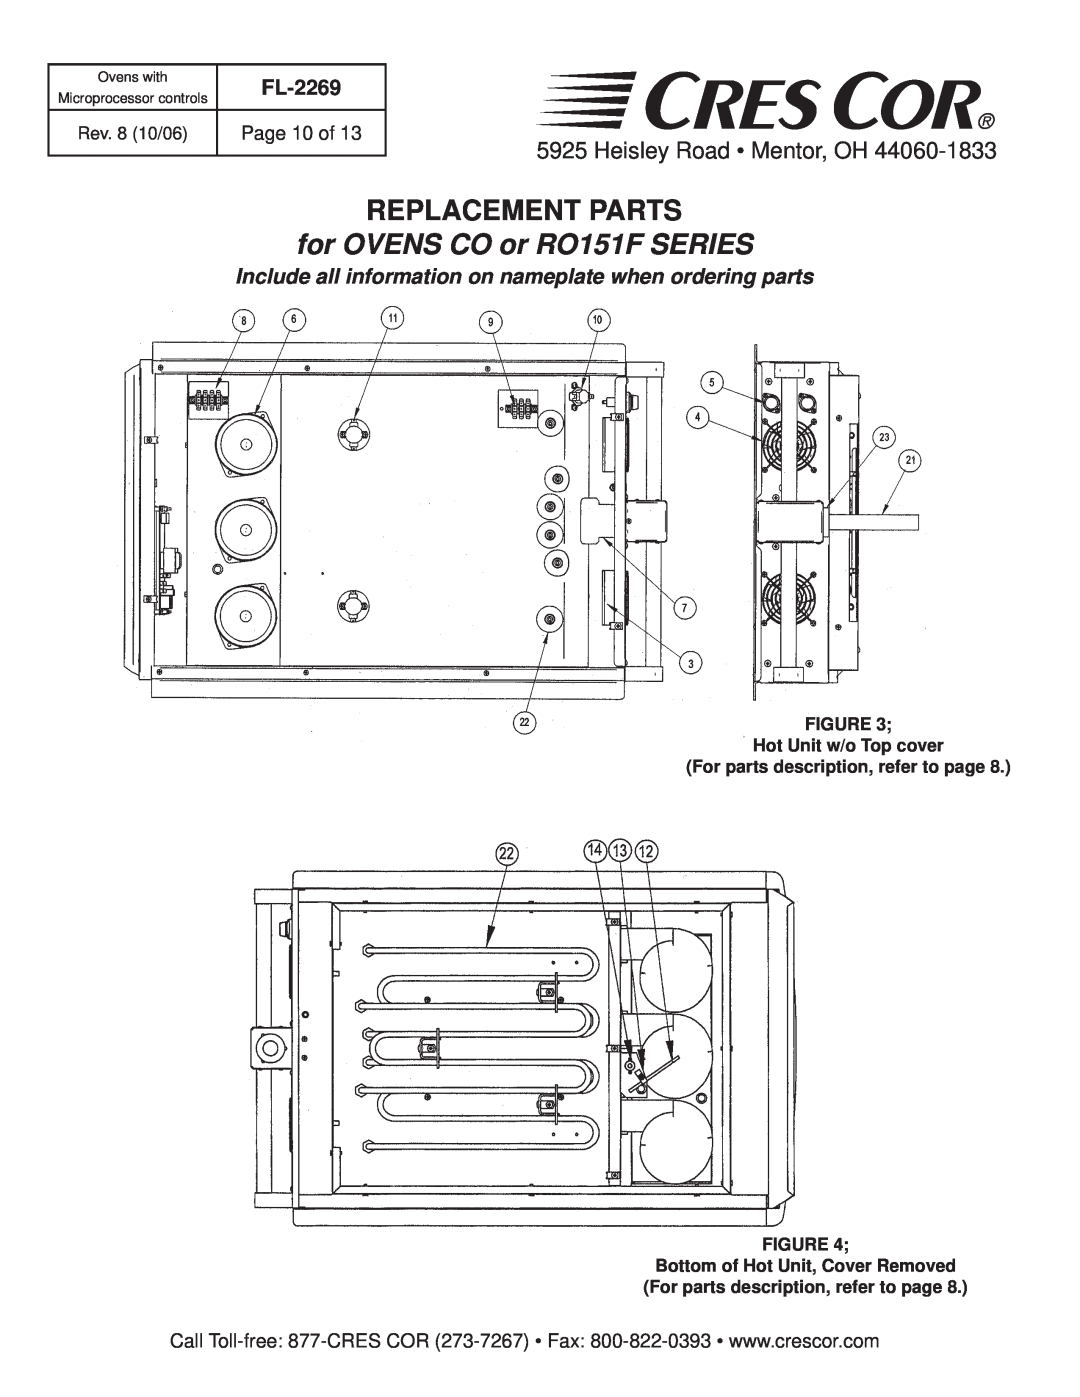 Cres Cor CO151H189B-Q1 for OVENS CO or RO151F SERIES, Page 10 of, Replacement Parts, Heisley Road Mentor, OH, FL-2269 